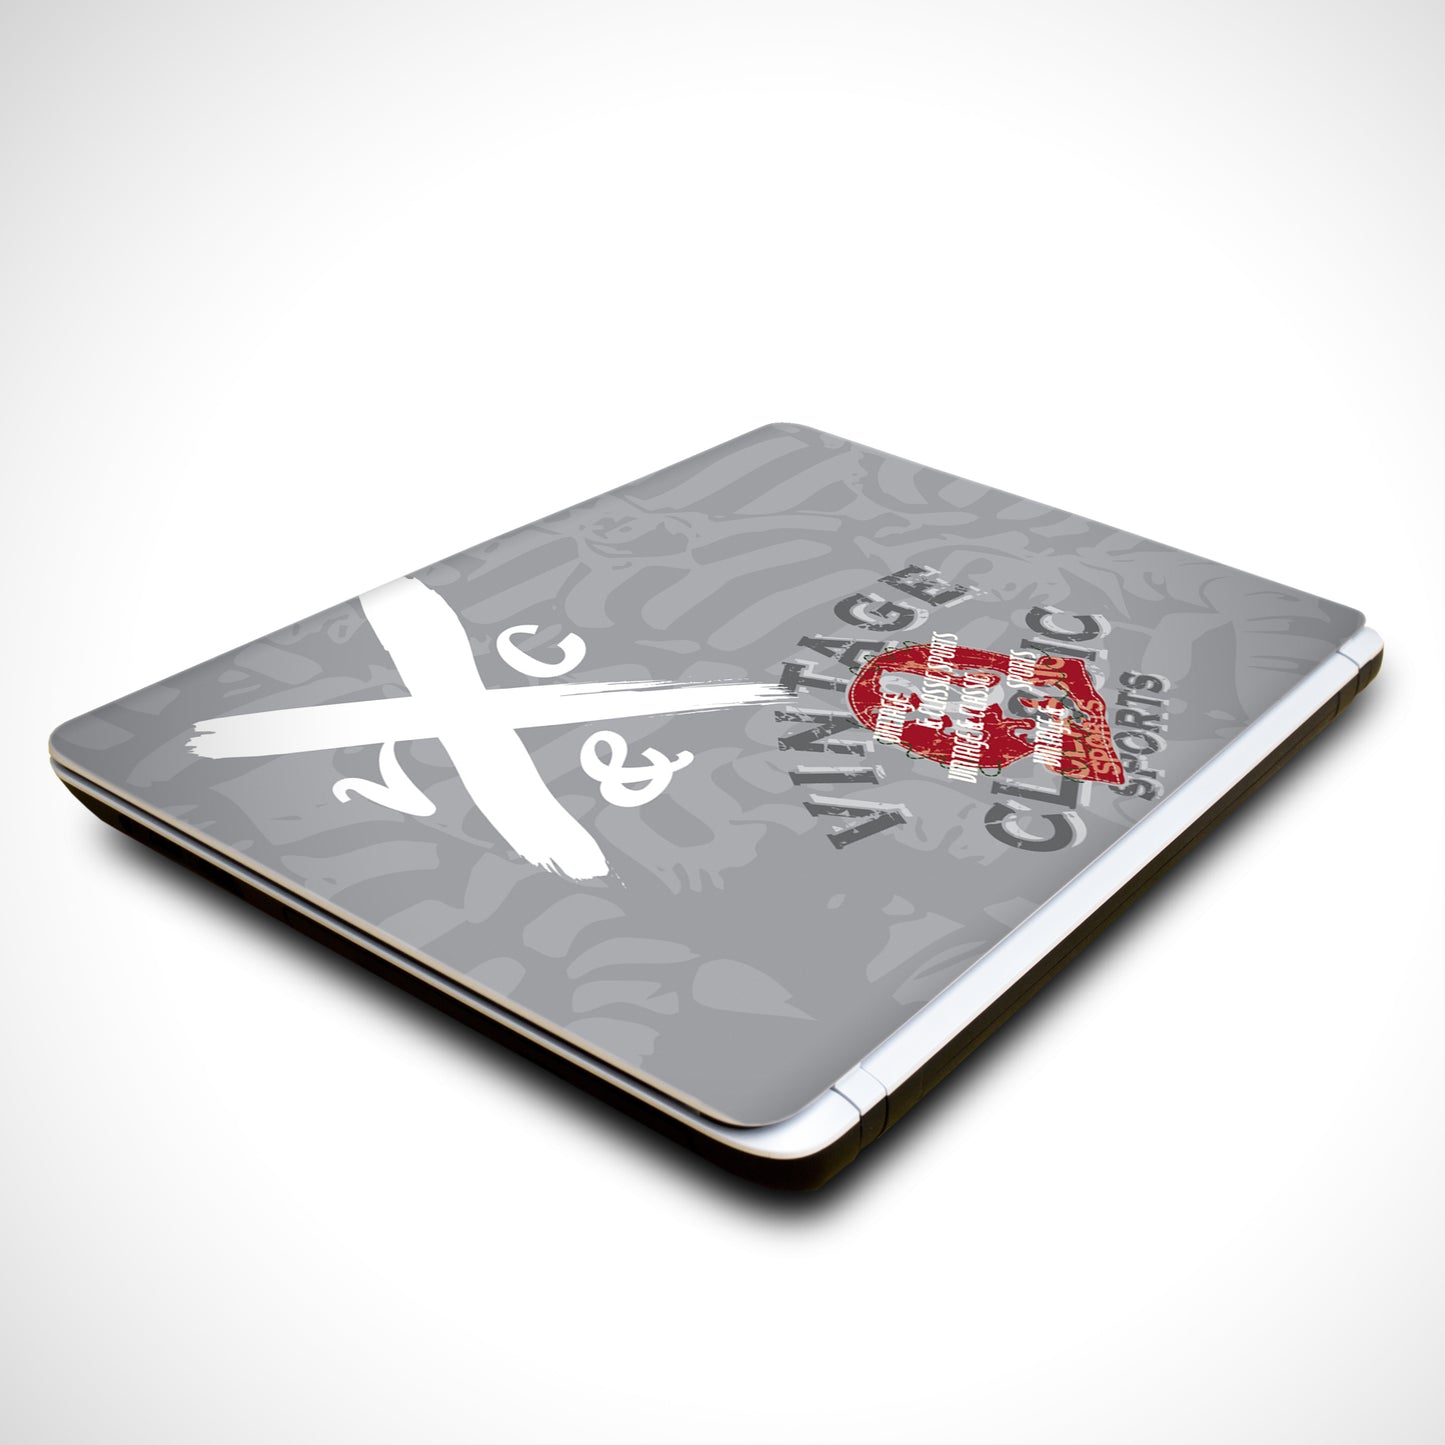 iberry's Vinyl Laptop Skin Sticker Collection for Dell, Hp, Toshiba, Acer, Asus & All Models (Upto 15.6 inches) -10